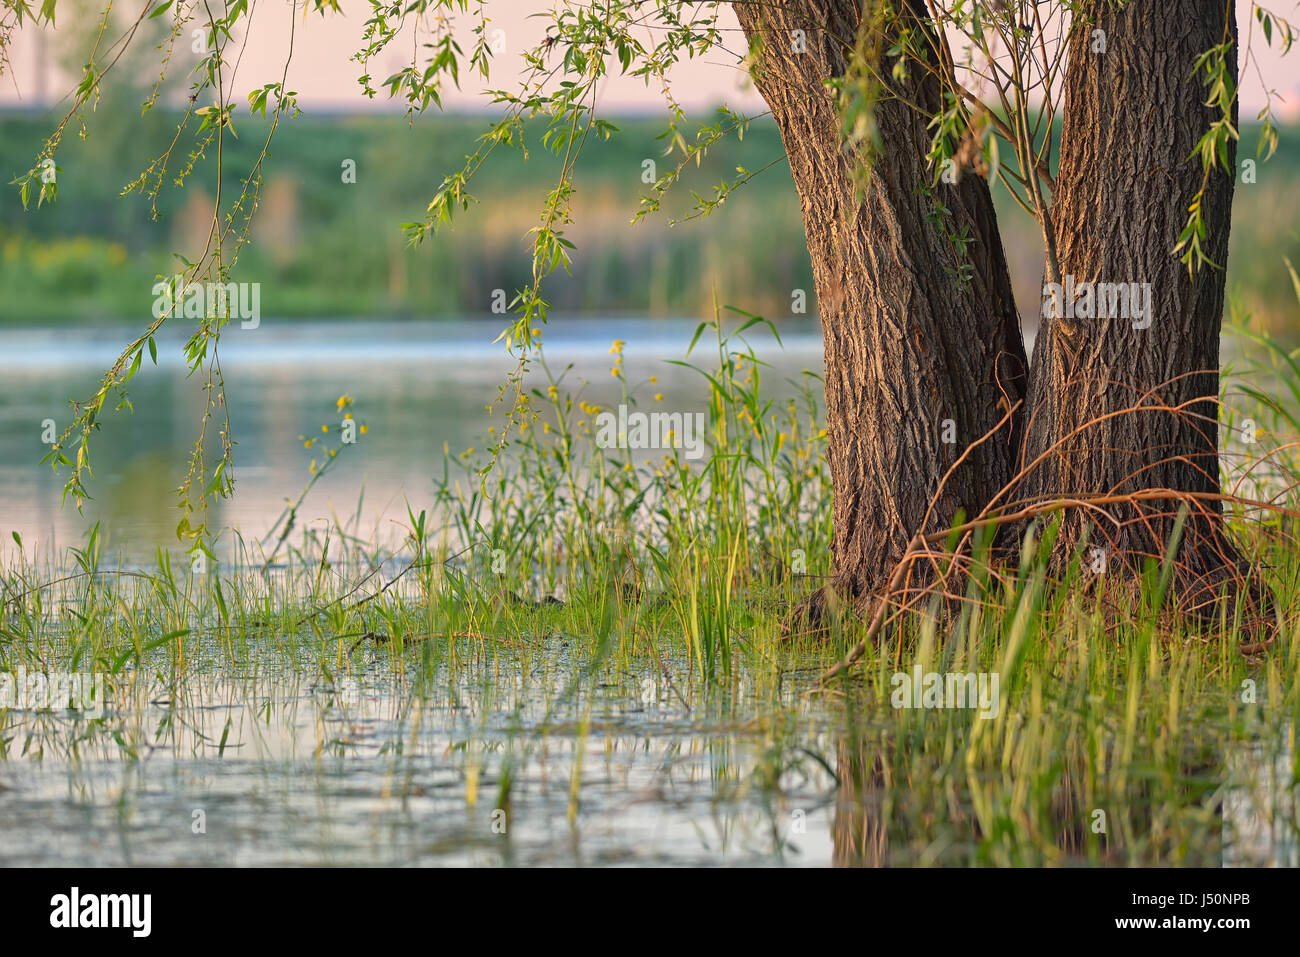 Weeping willow in a swamp at sunset Stock Photo